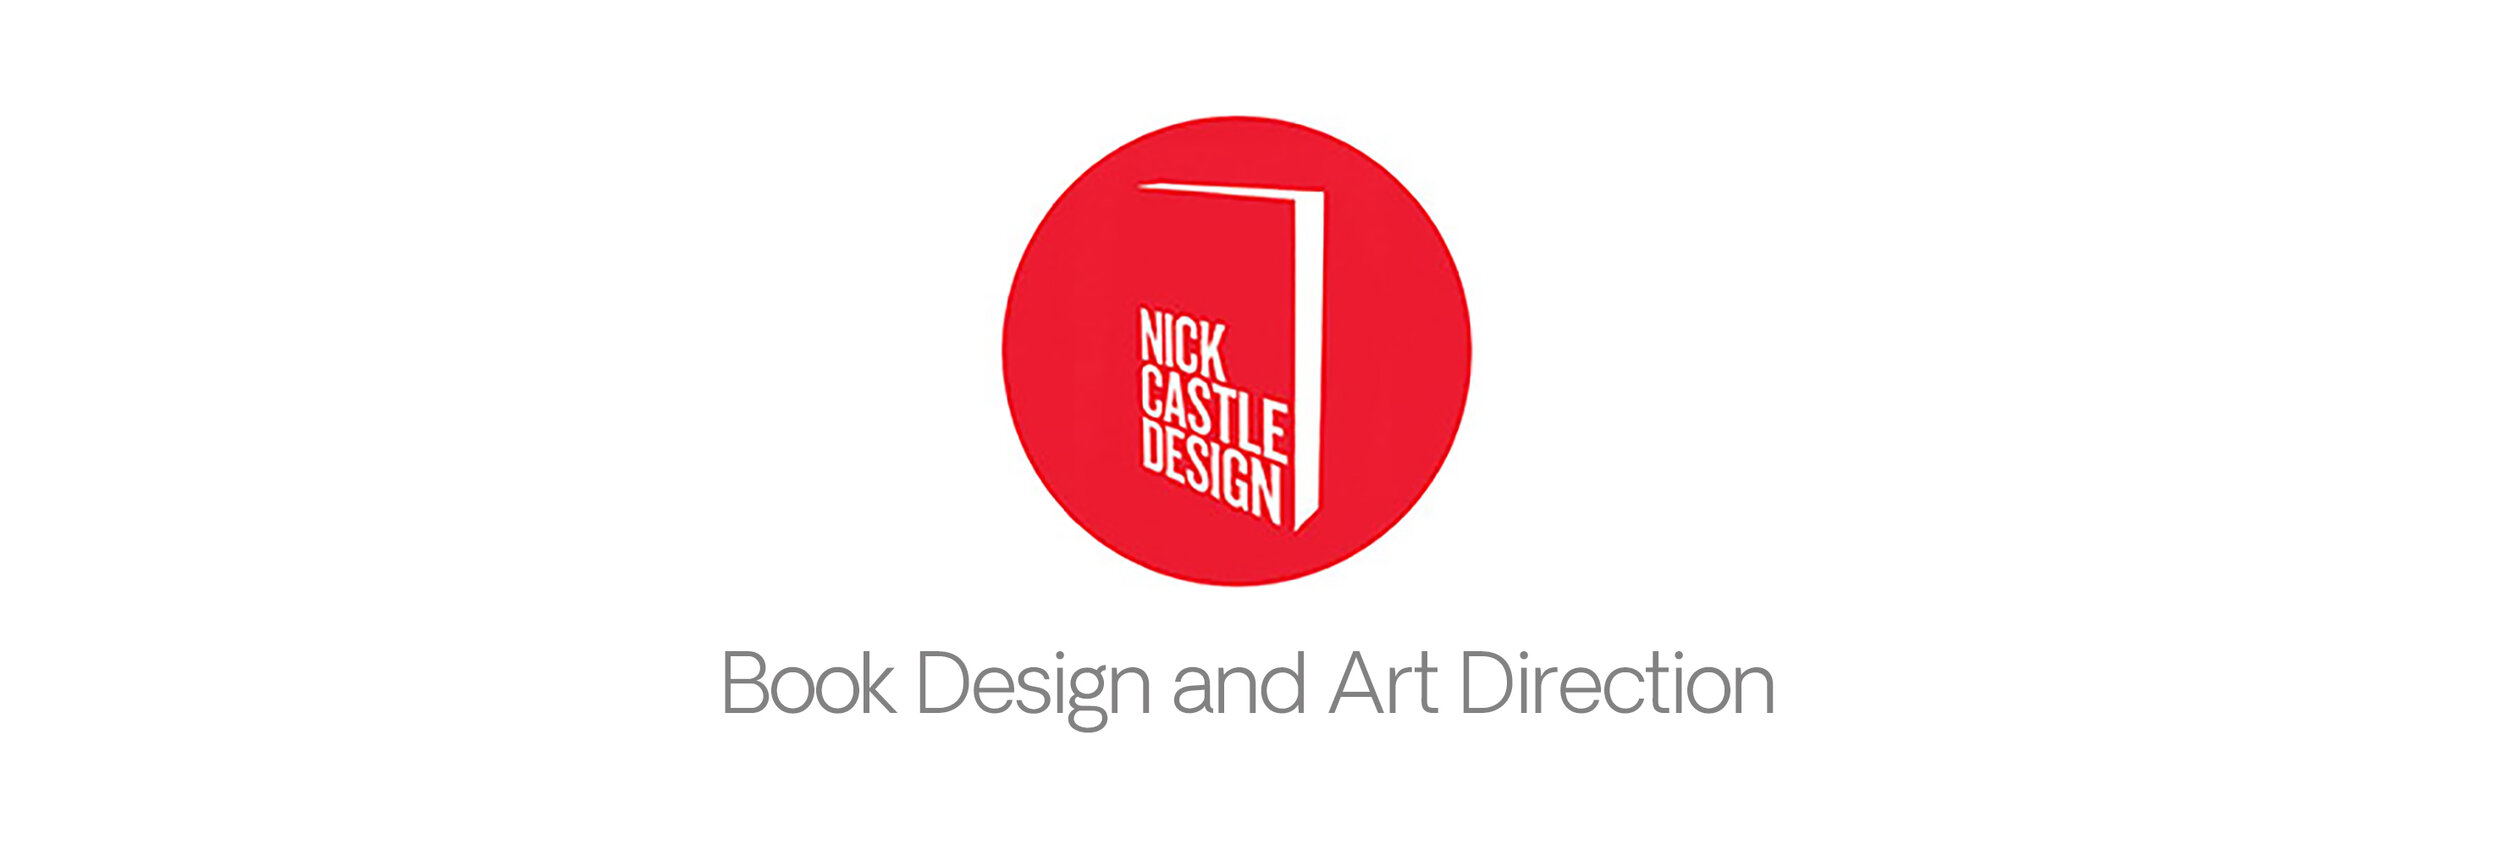 Book Design and Art Direction